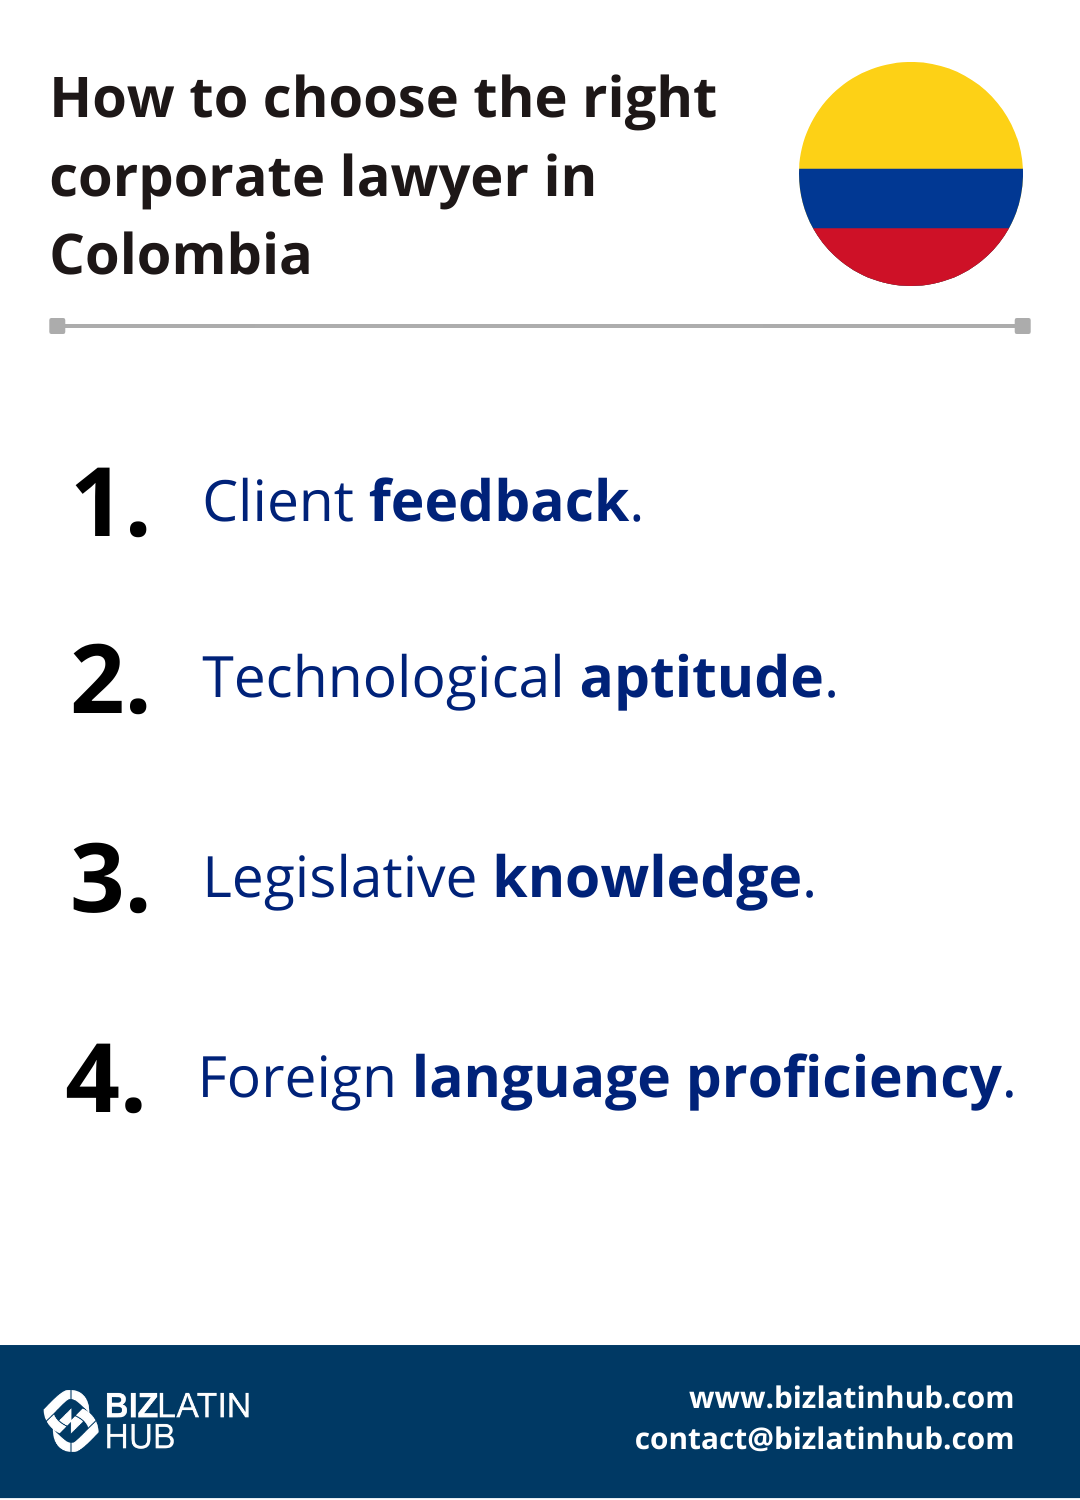 How to choose the right corporate lawyer in Colombia